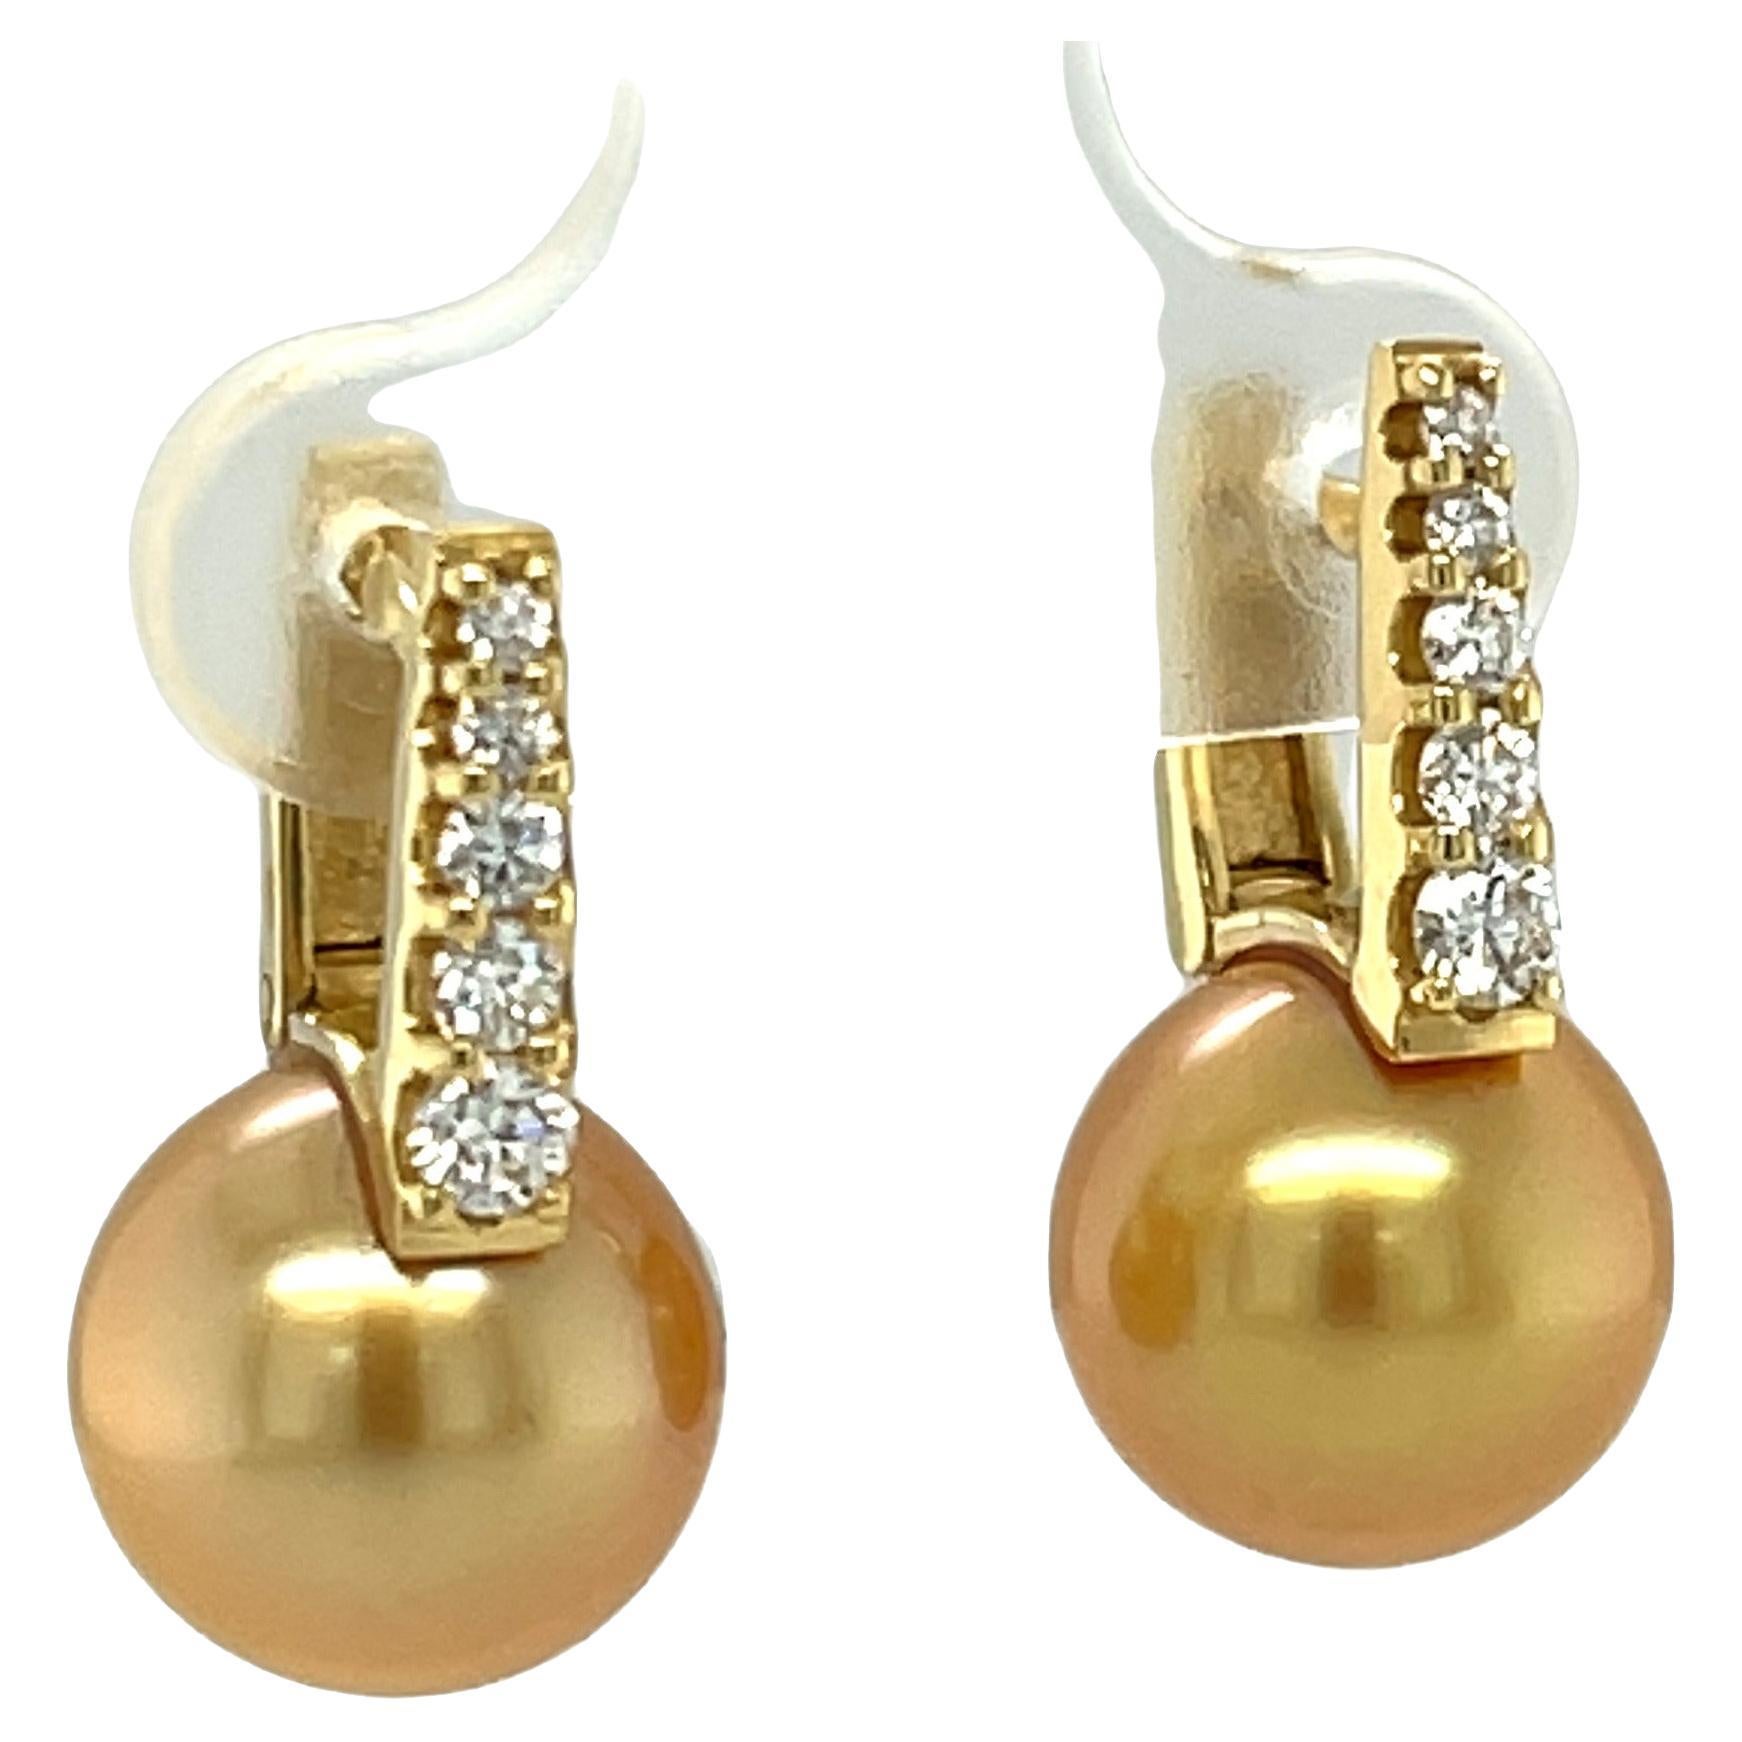 These beautiful drop earrings feature large, 10.75mm round South Seas pearls that are highly lusterous and have breathtaking golden color! The pearls are suspended from sparkling 18k yellow gold bars set with brilliant white diamonds in graduating